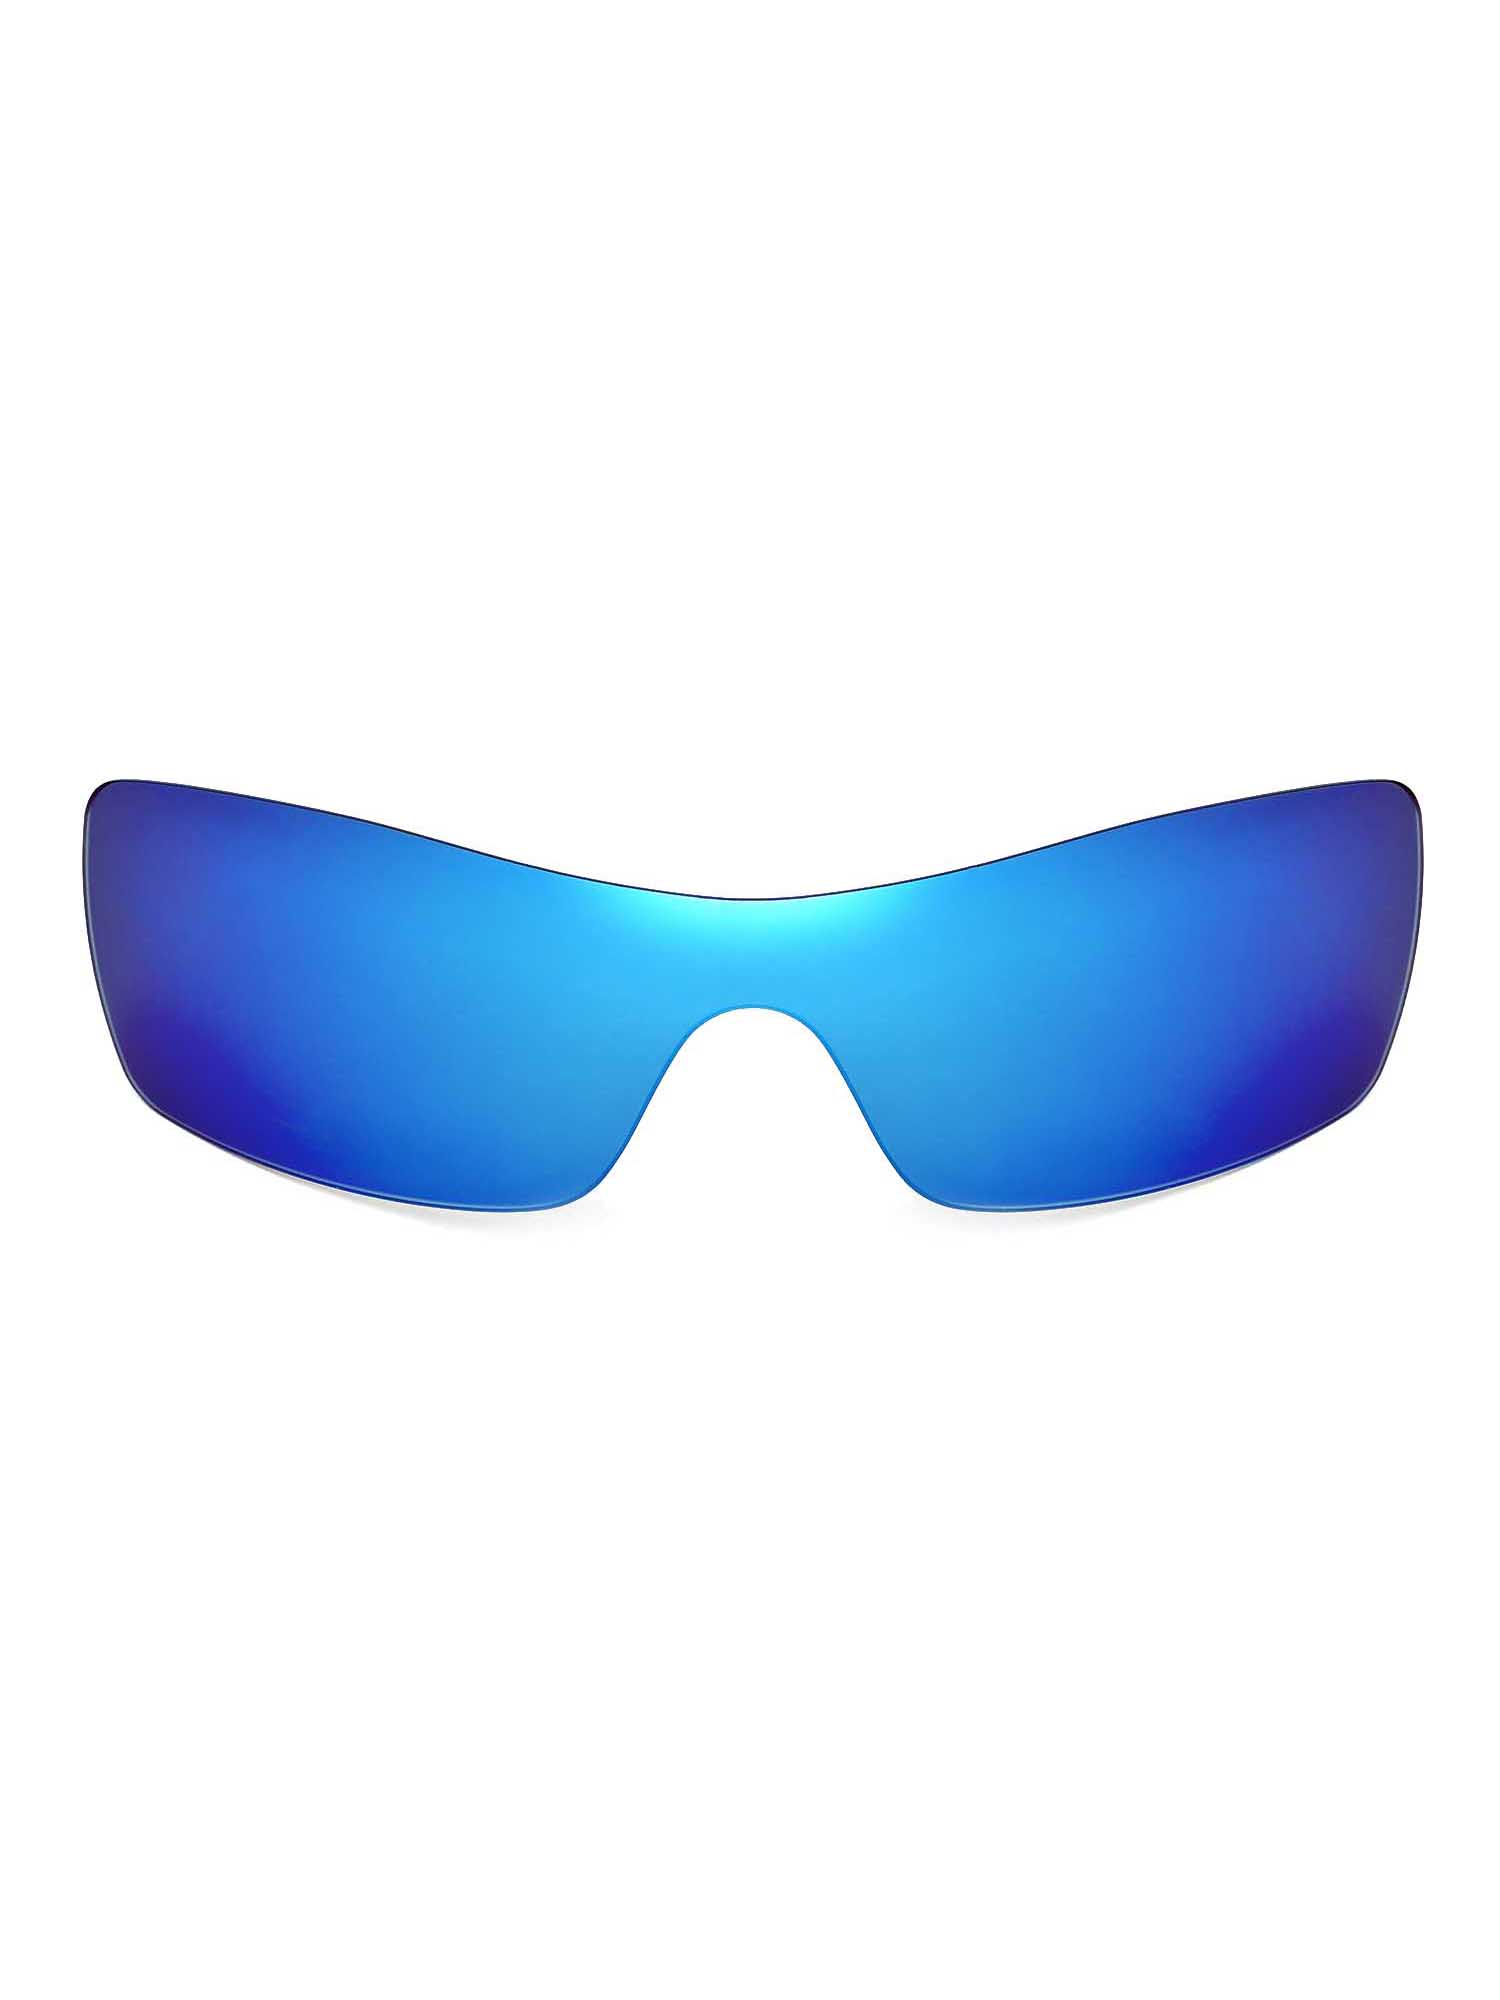 Walleva Ice Blue Polarized Replacement Lenses for Oakley Batwolf Sunglasses - image 2 of 7